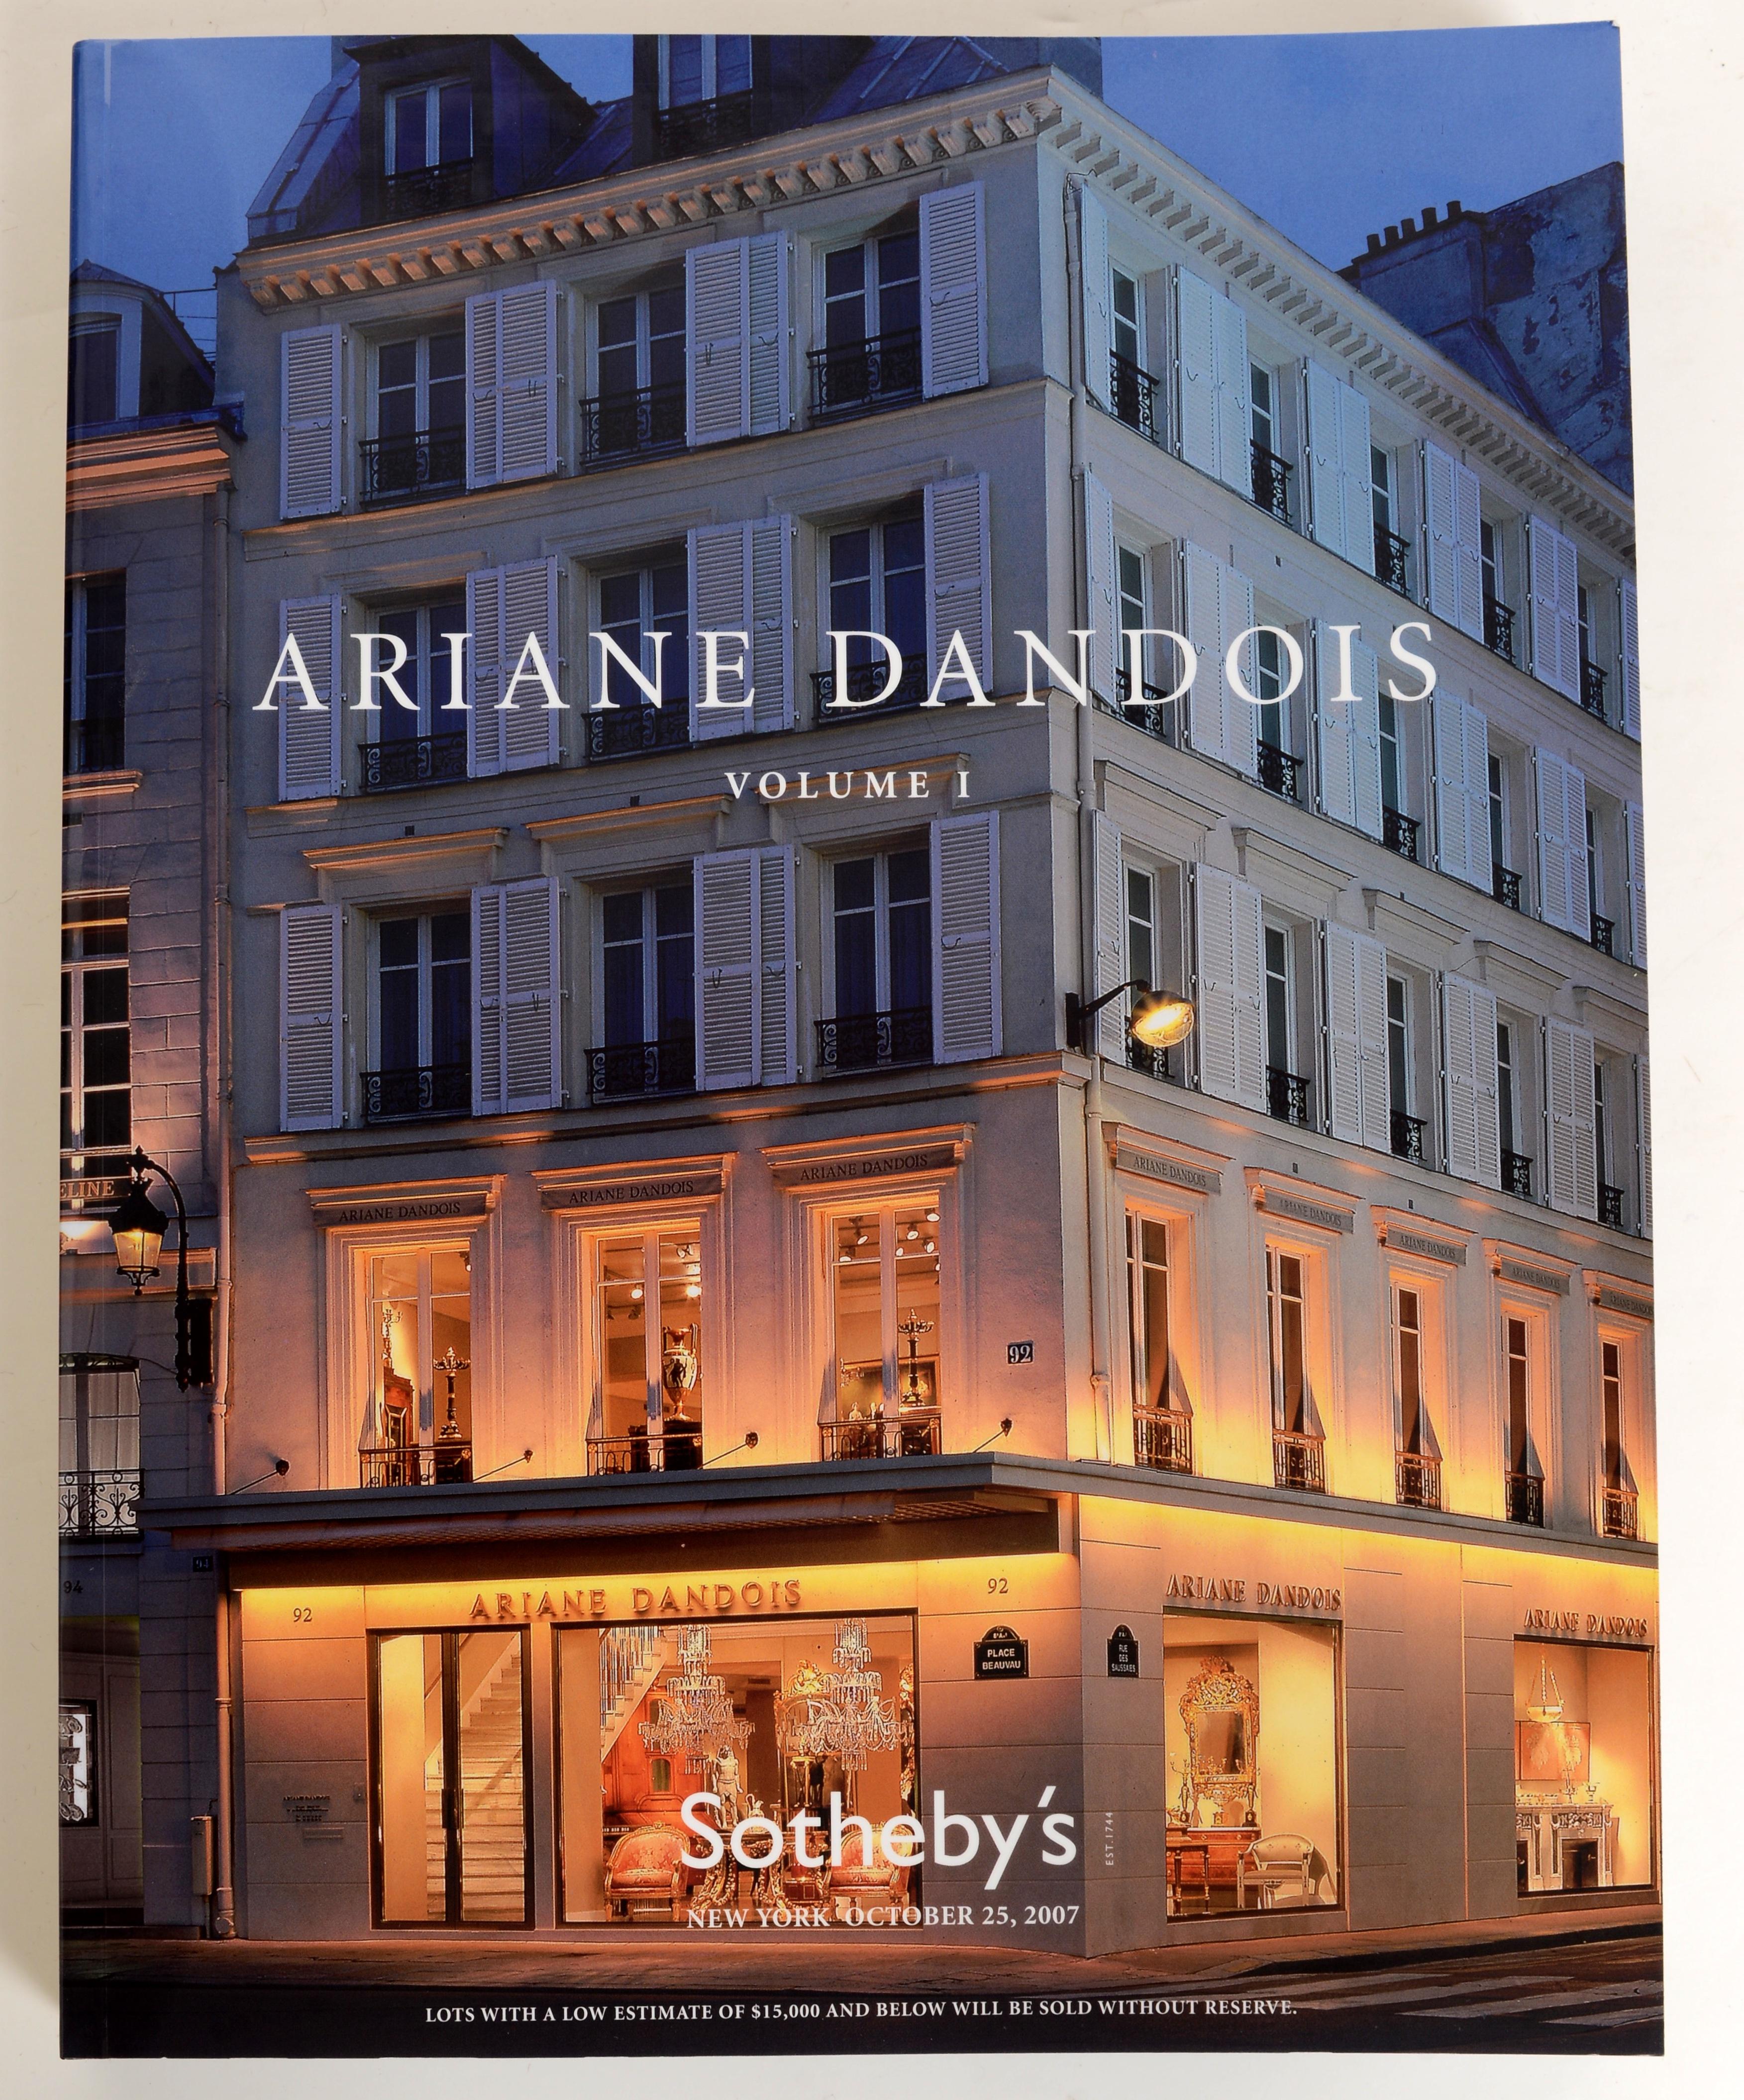 Sotheby's Ariane Dandois, October 2007, Volumes I and II. Pair of 1st Ed softcover auction catalogs with slipcase. Sotheby’s New York presented a sale of property from the legendary Galerie Ariane Dandois in Paris. Following a decision to close her